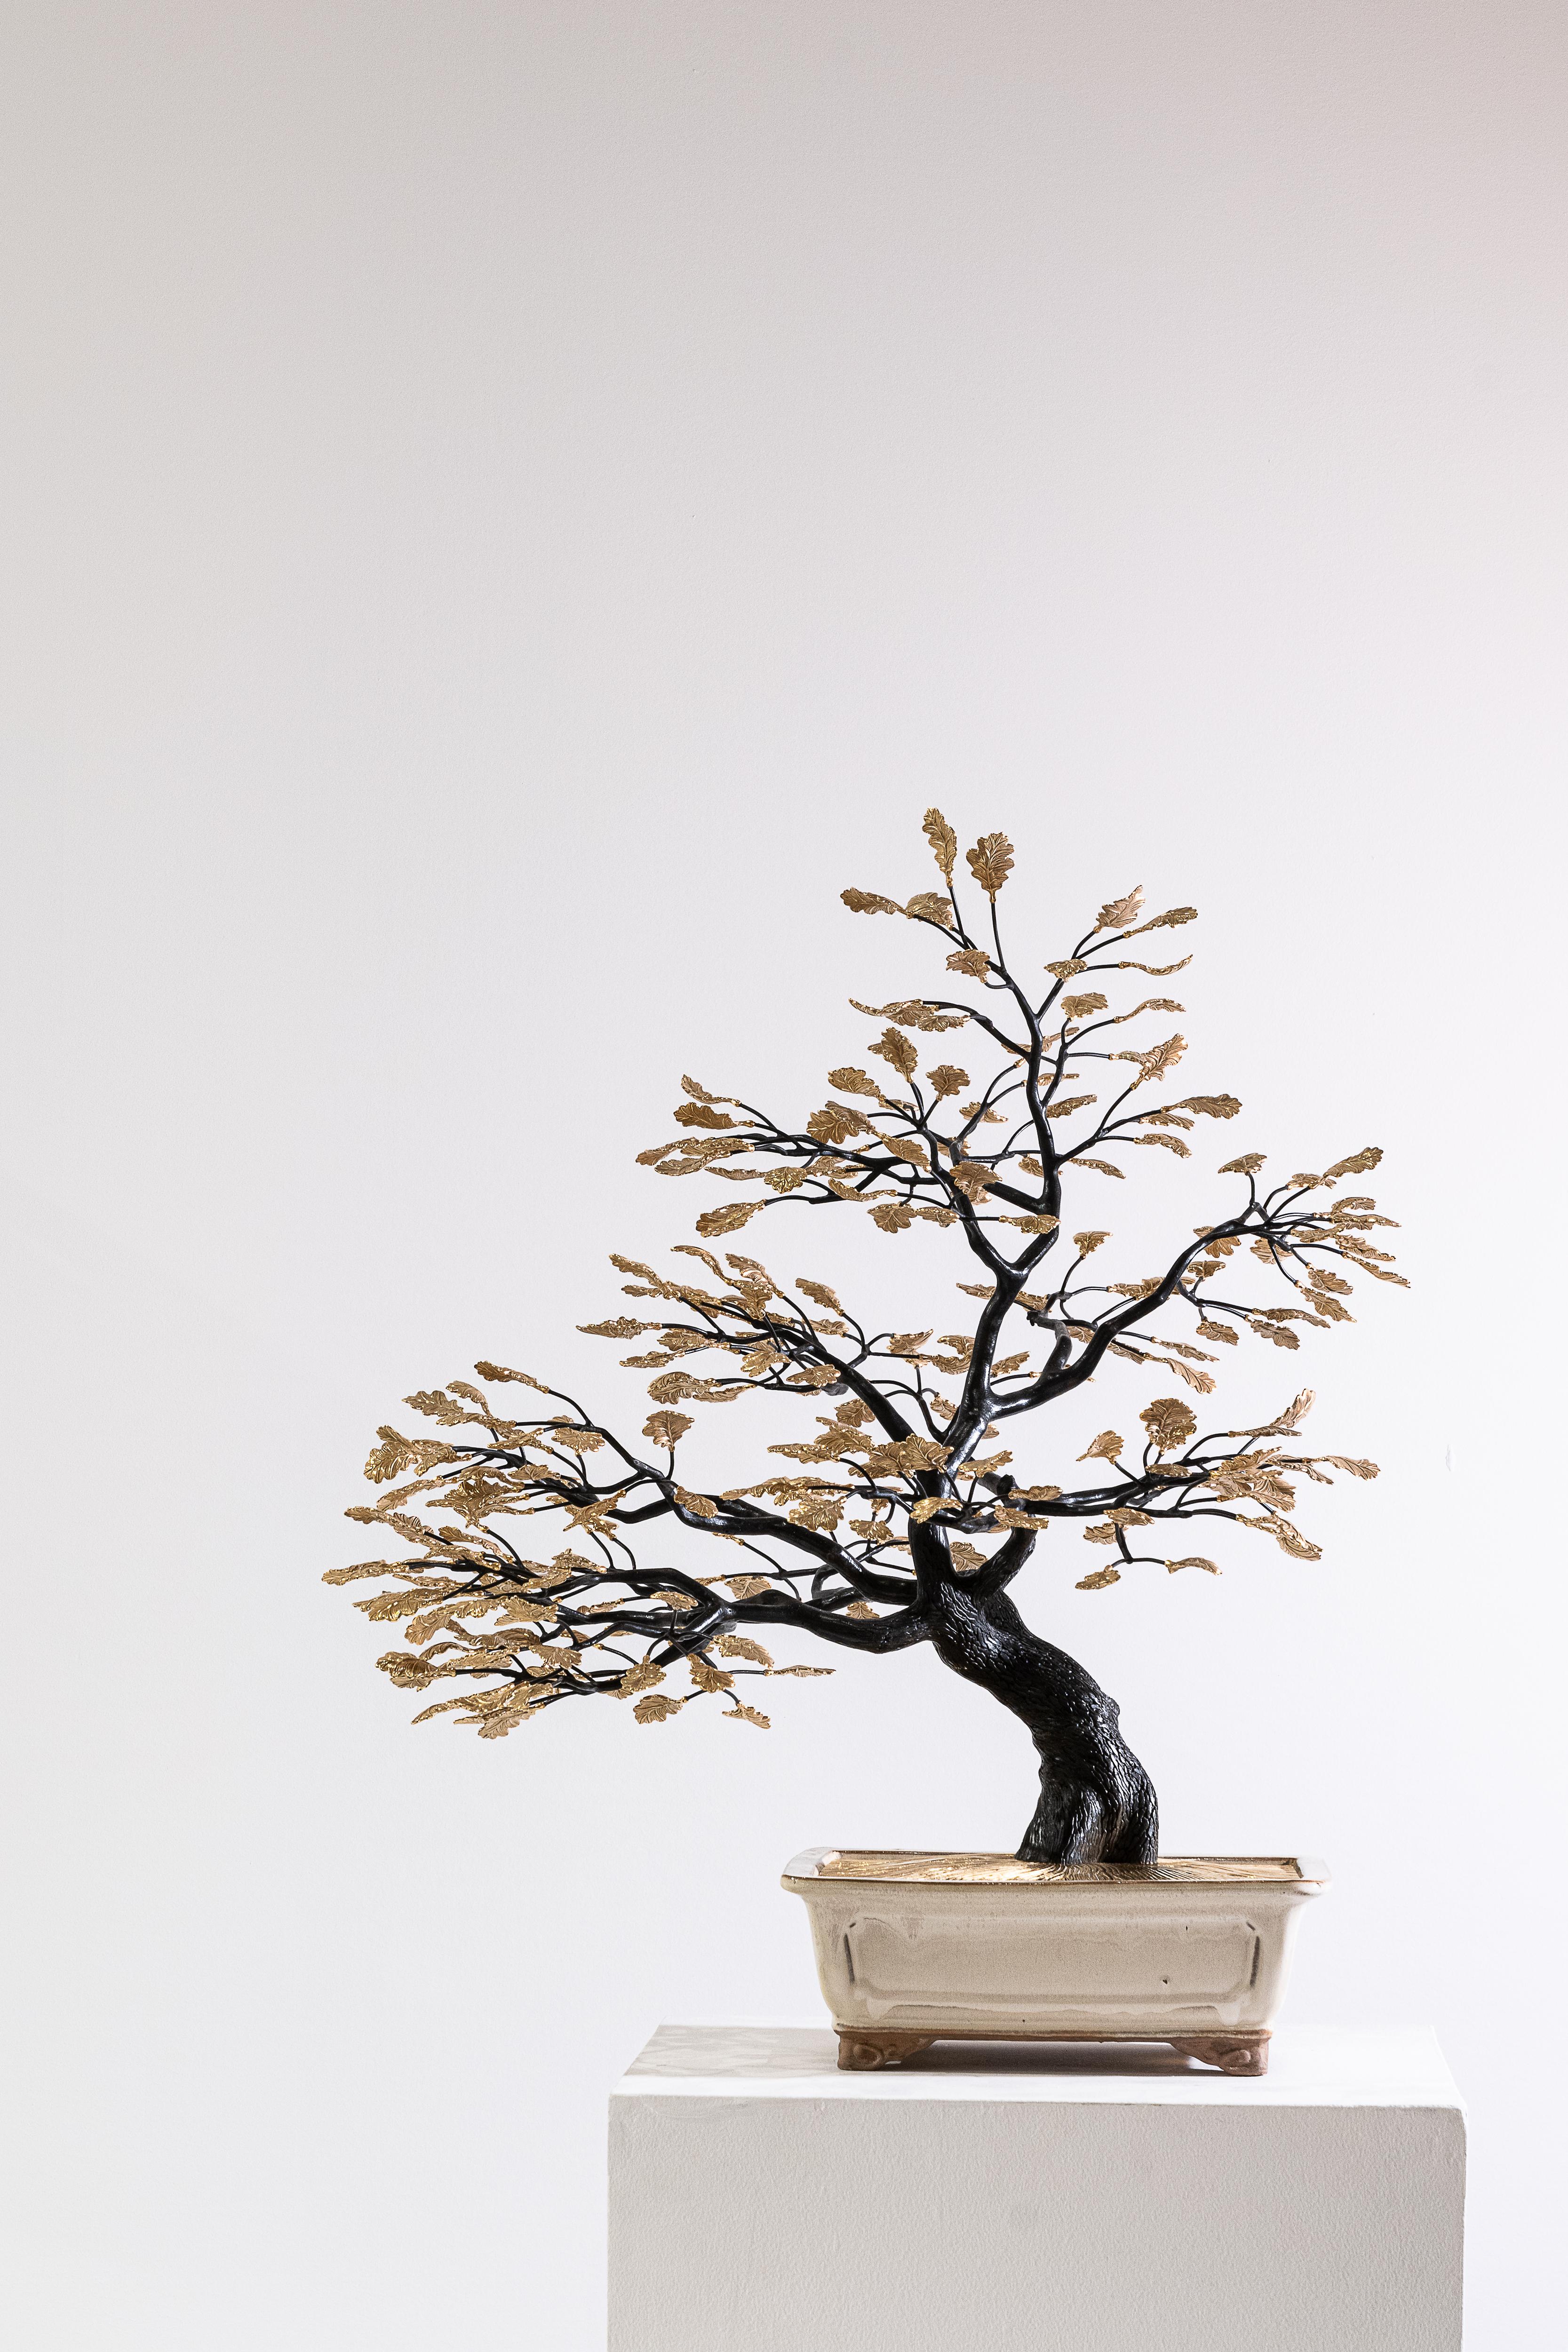 Bonsai Tree by Pierre Salagnac
Material: Bronze, 24K gold, brass
Dimensions: H 61 x 56 x 59 cm
Type: one-of-the-kind
Year: 2023

Revealing the organic curves of nature in the metal block with great talent, Pierre Salagnac has made a name for himself